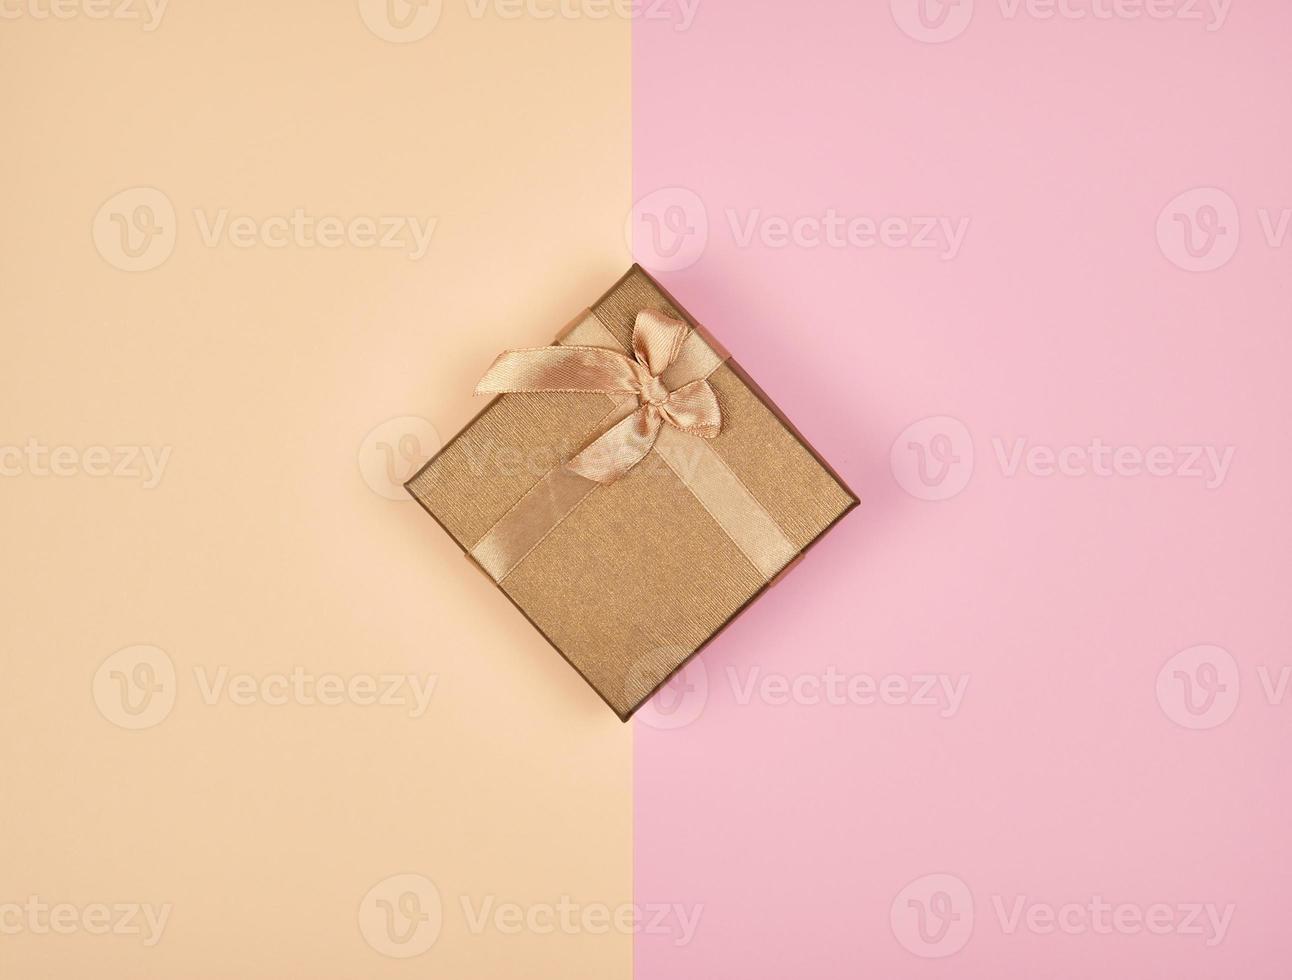 closed square box with a bow on an abstract colored background photo